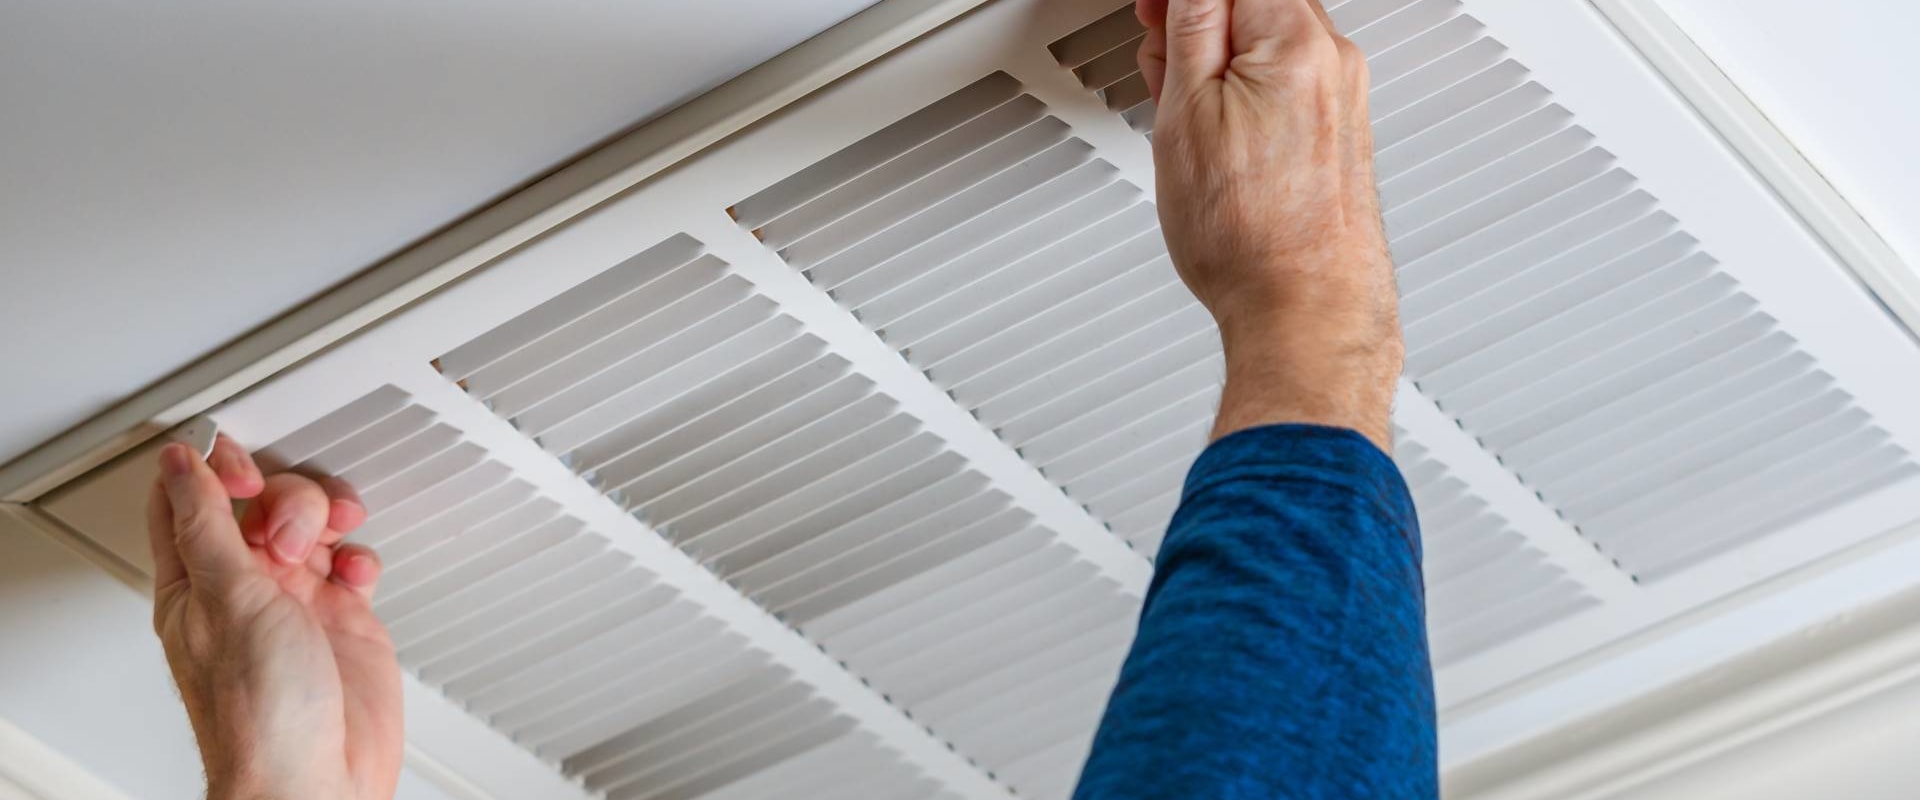 Scheduling an Appointment for Air Duct Cleaning Services